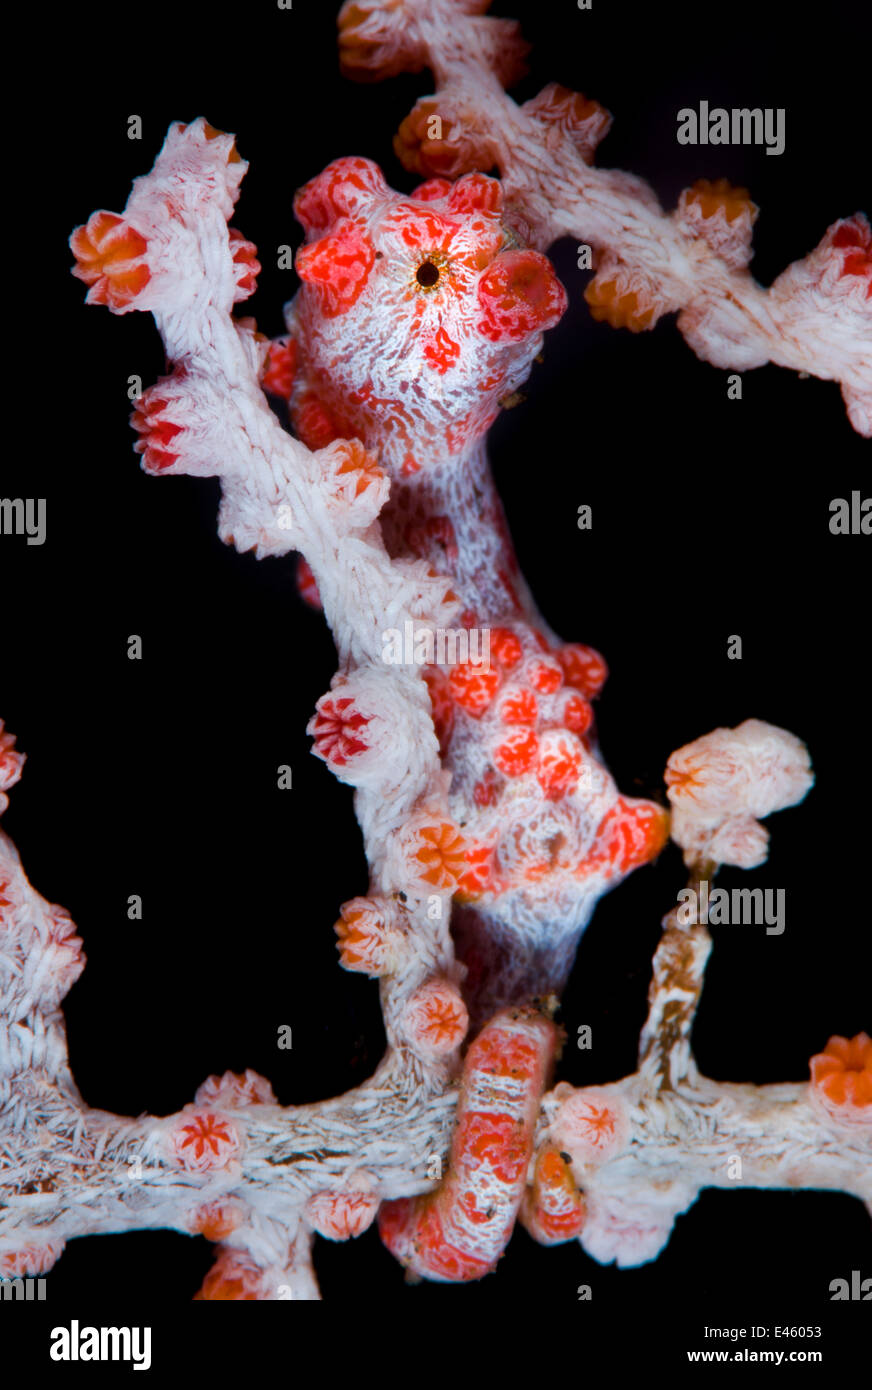 A Pygmy Seahorse (Hippocampus bargibanti) in red seafan (Muricella sp.). Pygmy Seahorses are small, most less than 15mm in total length. Tulamben, Bali, Indonesia, Java Sea, August. Stock Photo